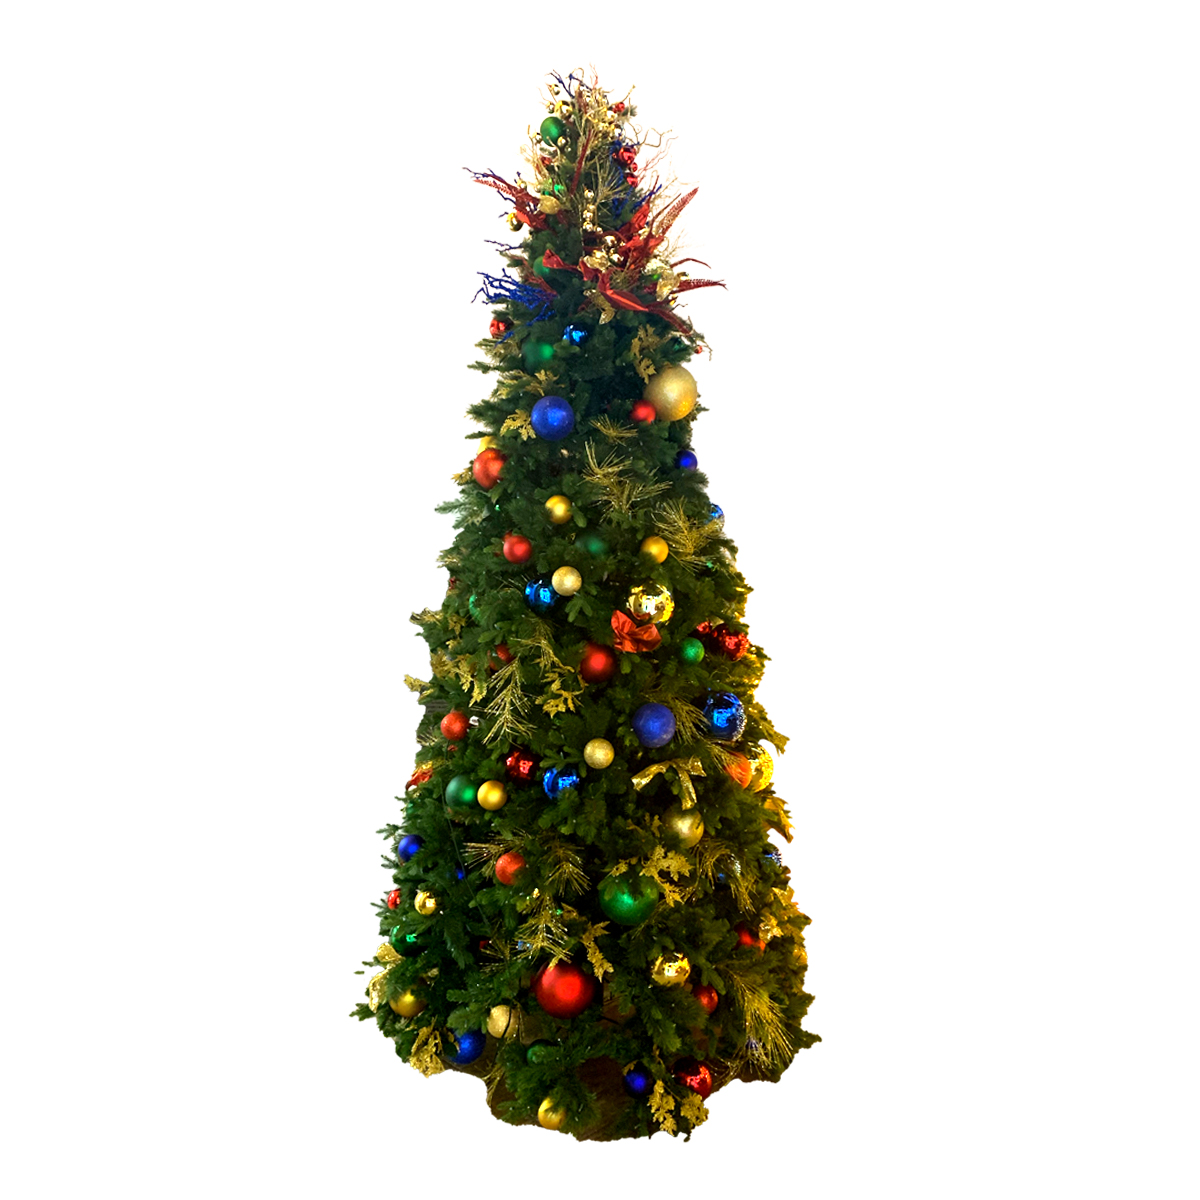 Northern Seasons Collection - Pre-Decorated Christmas Tree - 7.5ft Tall - Warm White LEDs